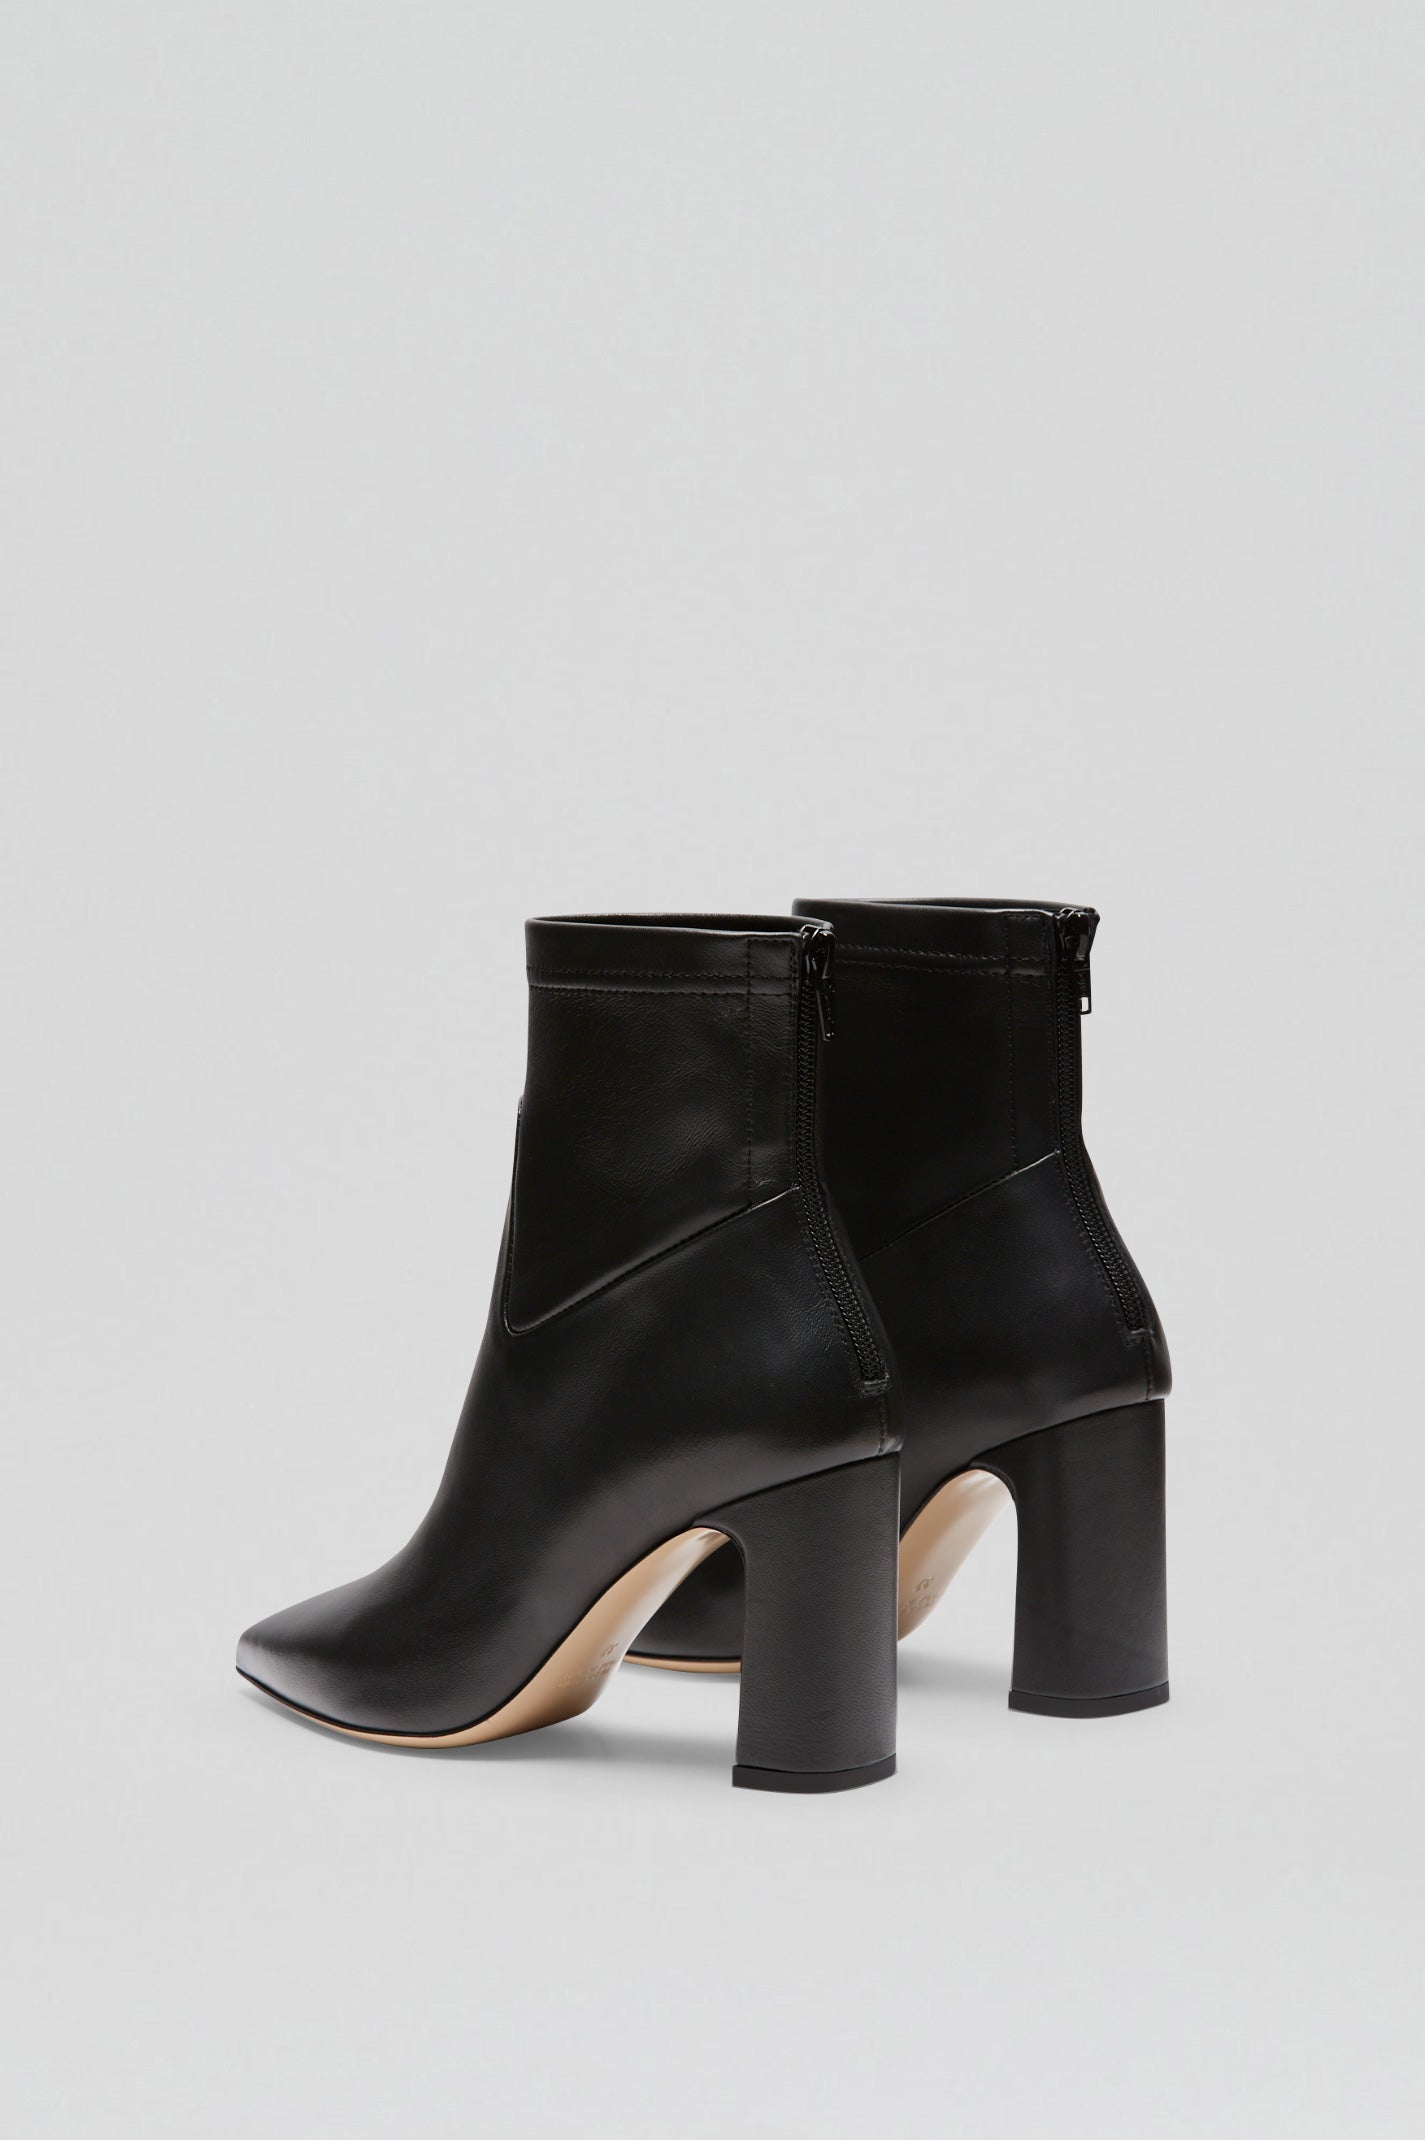 stretch-ankle-boot-85-black